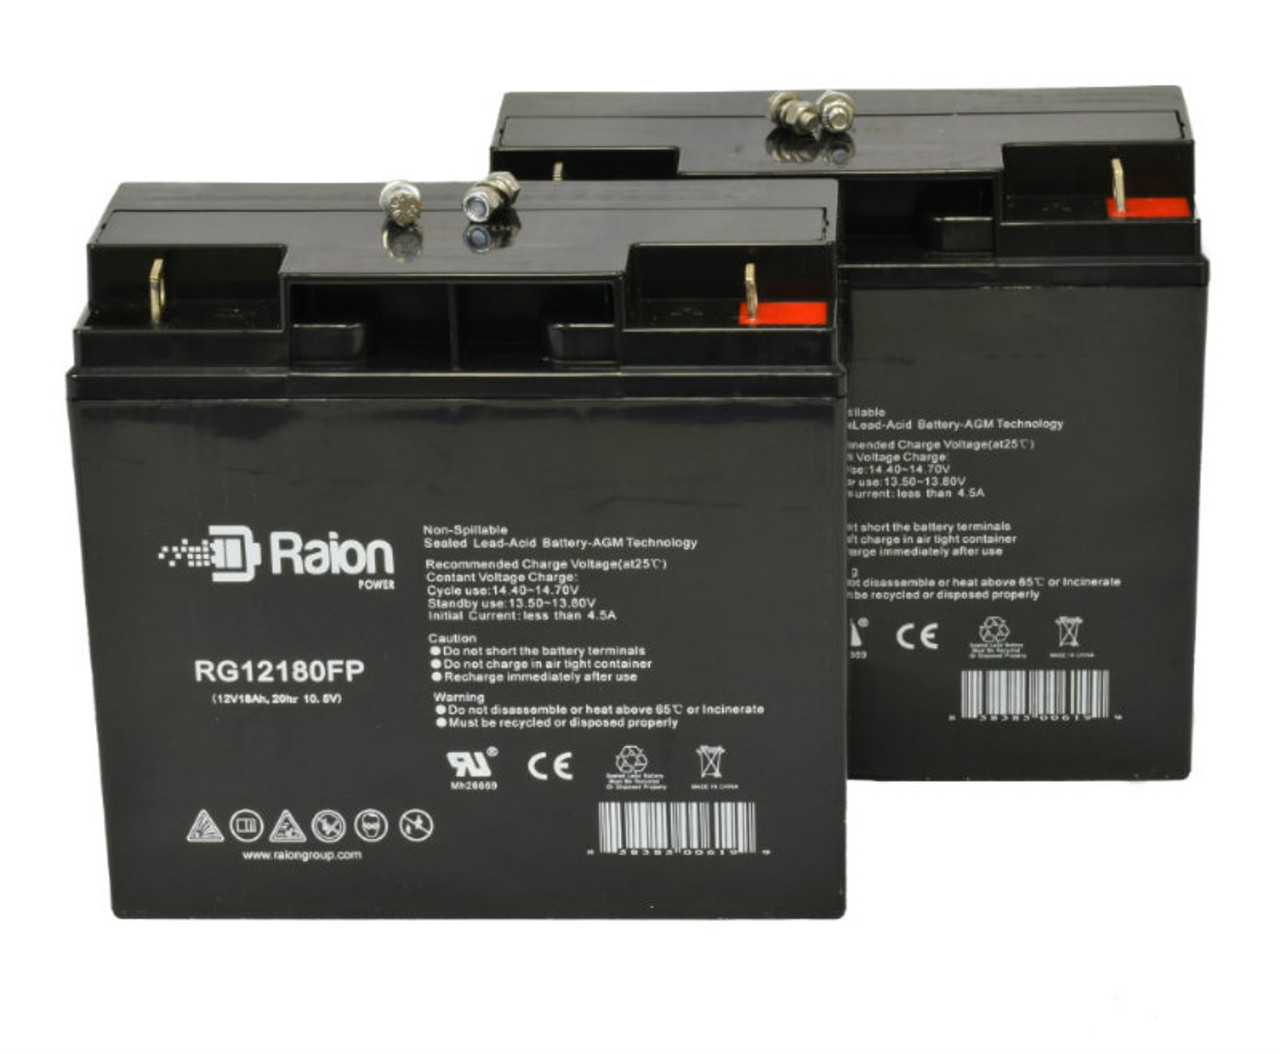 Raion Power Replacement RG12180FP 12V 18Ah Emergency Light Battery for Light Alarms CE15CB - 2 Pack